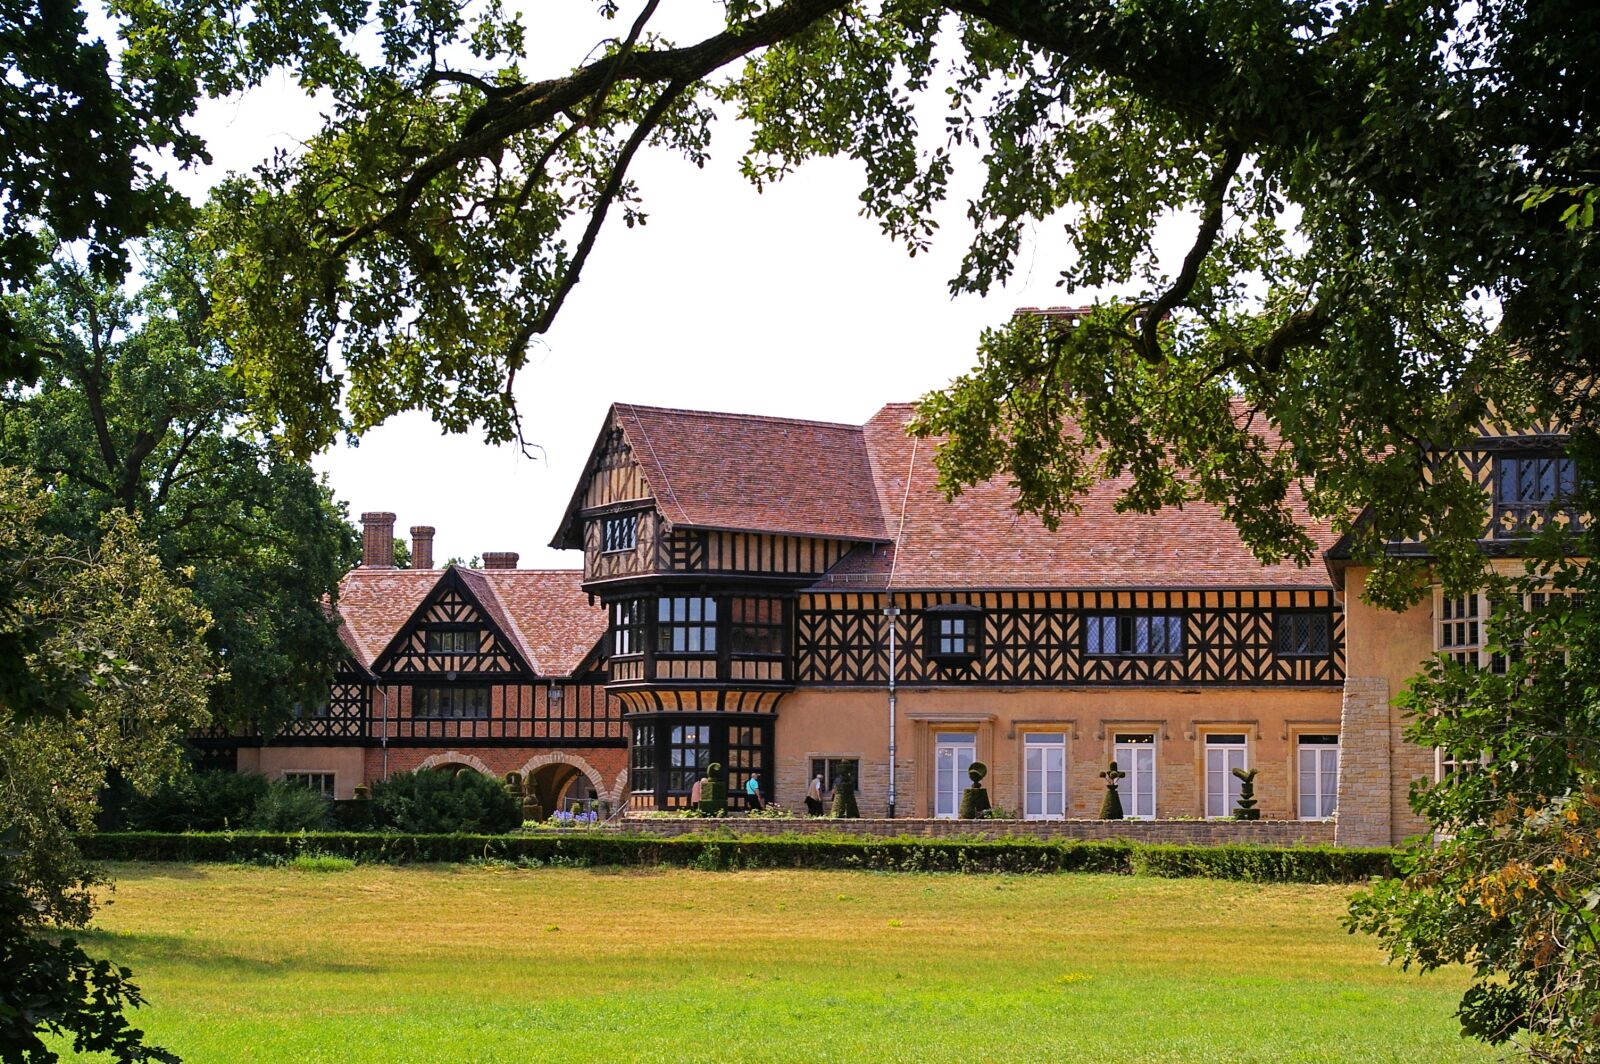 Pentax *ist DL2 sample photo. Schloss cecilienhof, in the photography